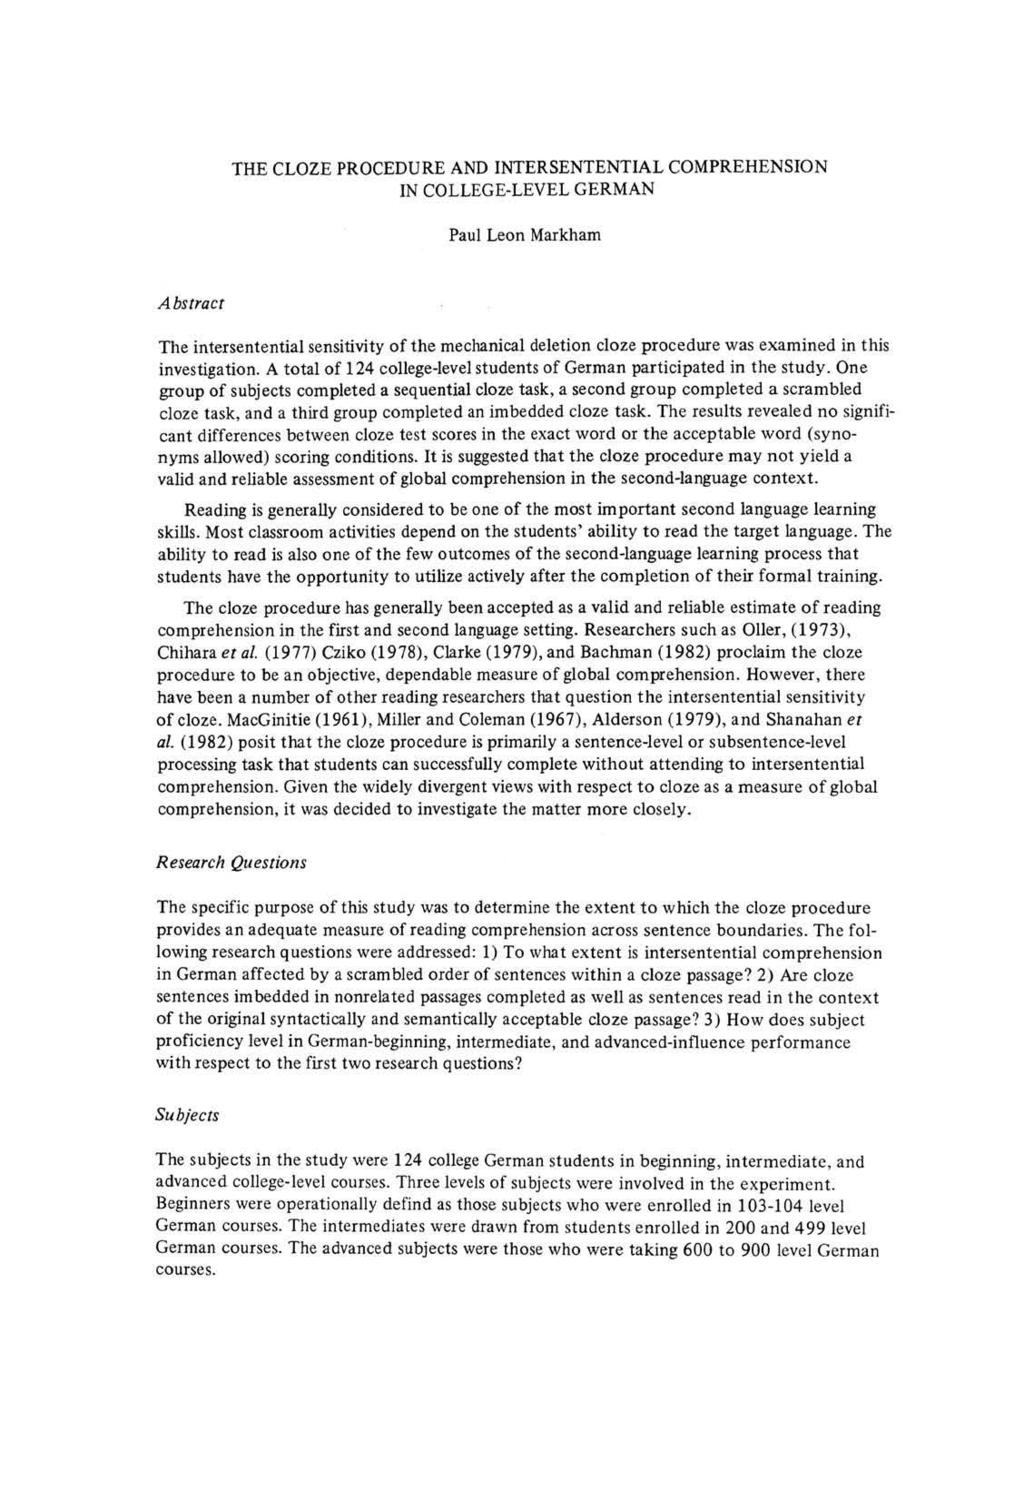 THE CLOZE PROCEDURE AND INTERSENTENTIAL COMPREHENSION IN COLLEGE-LEVEL GERMAN Paul Leon Markham Abstract The intersentential sensitivity of the mechanical deletion cloze procedure was examined in